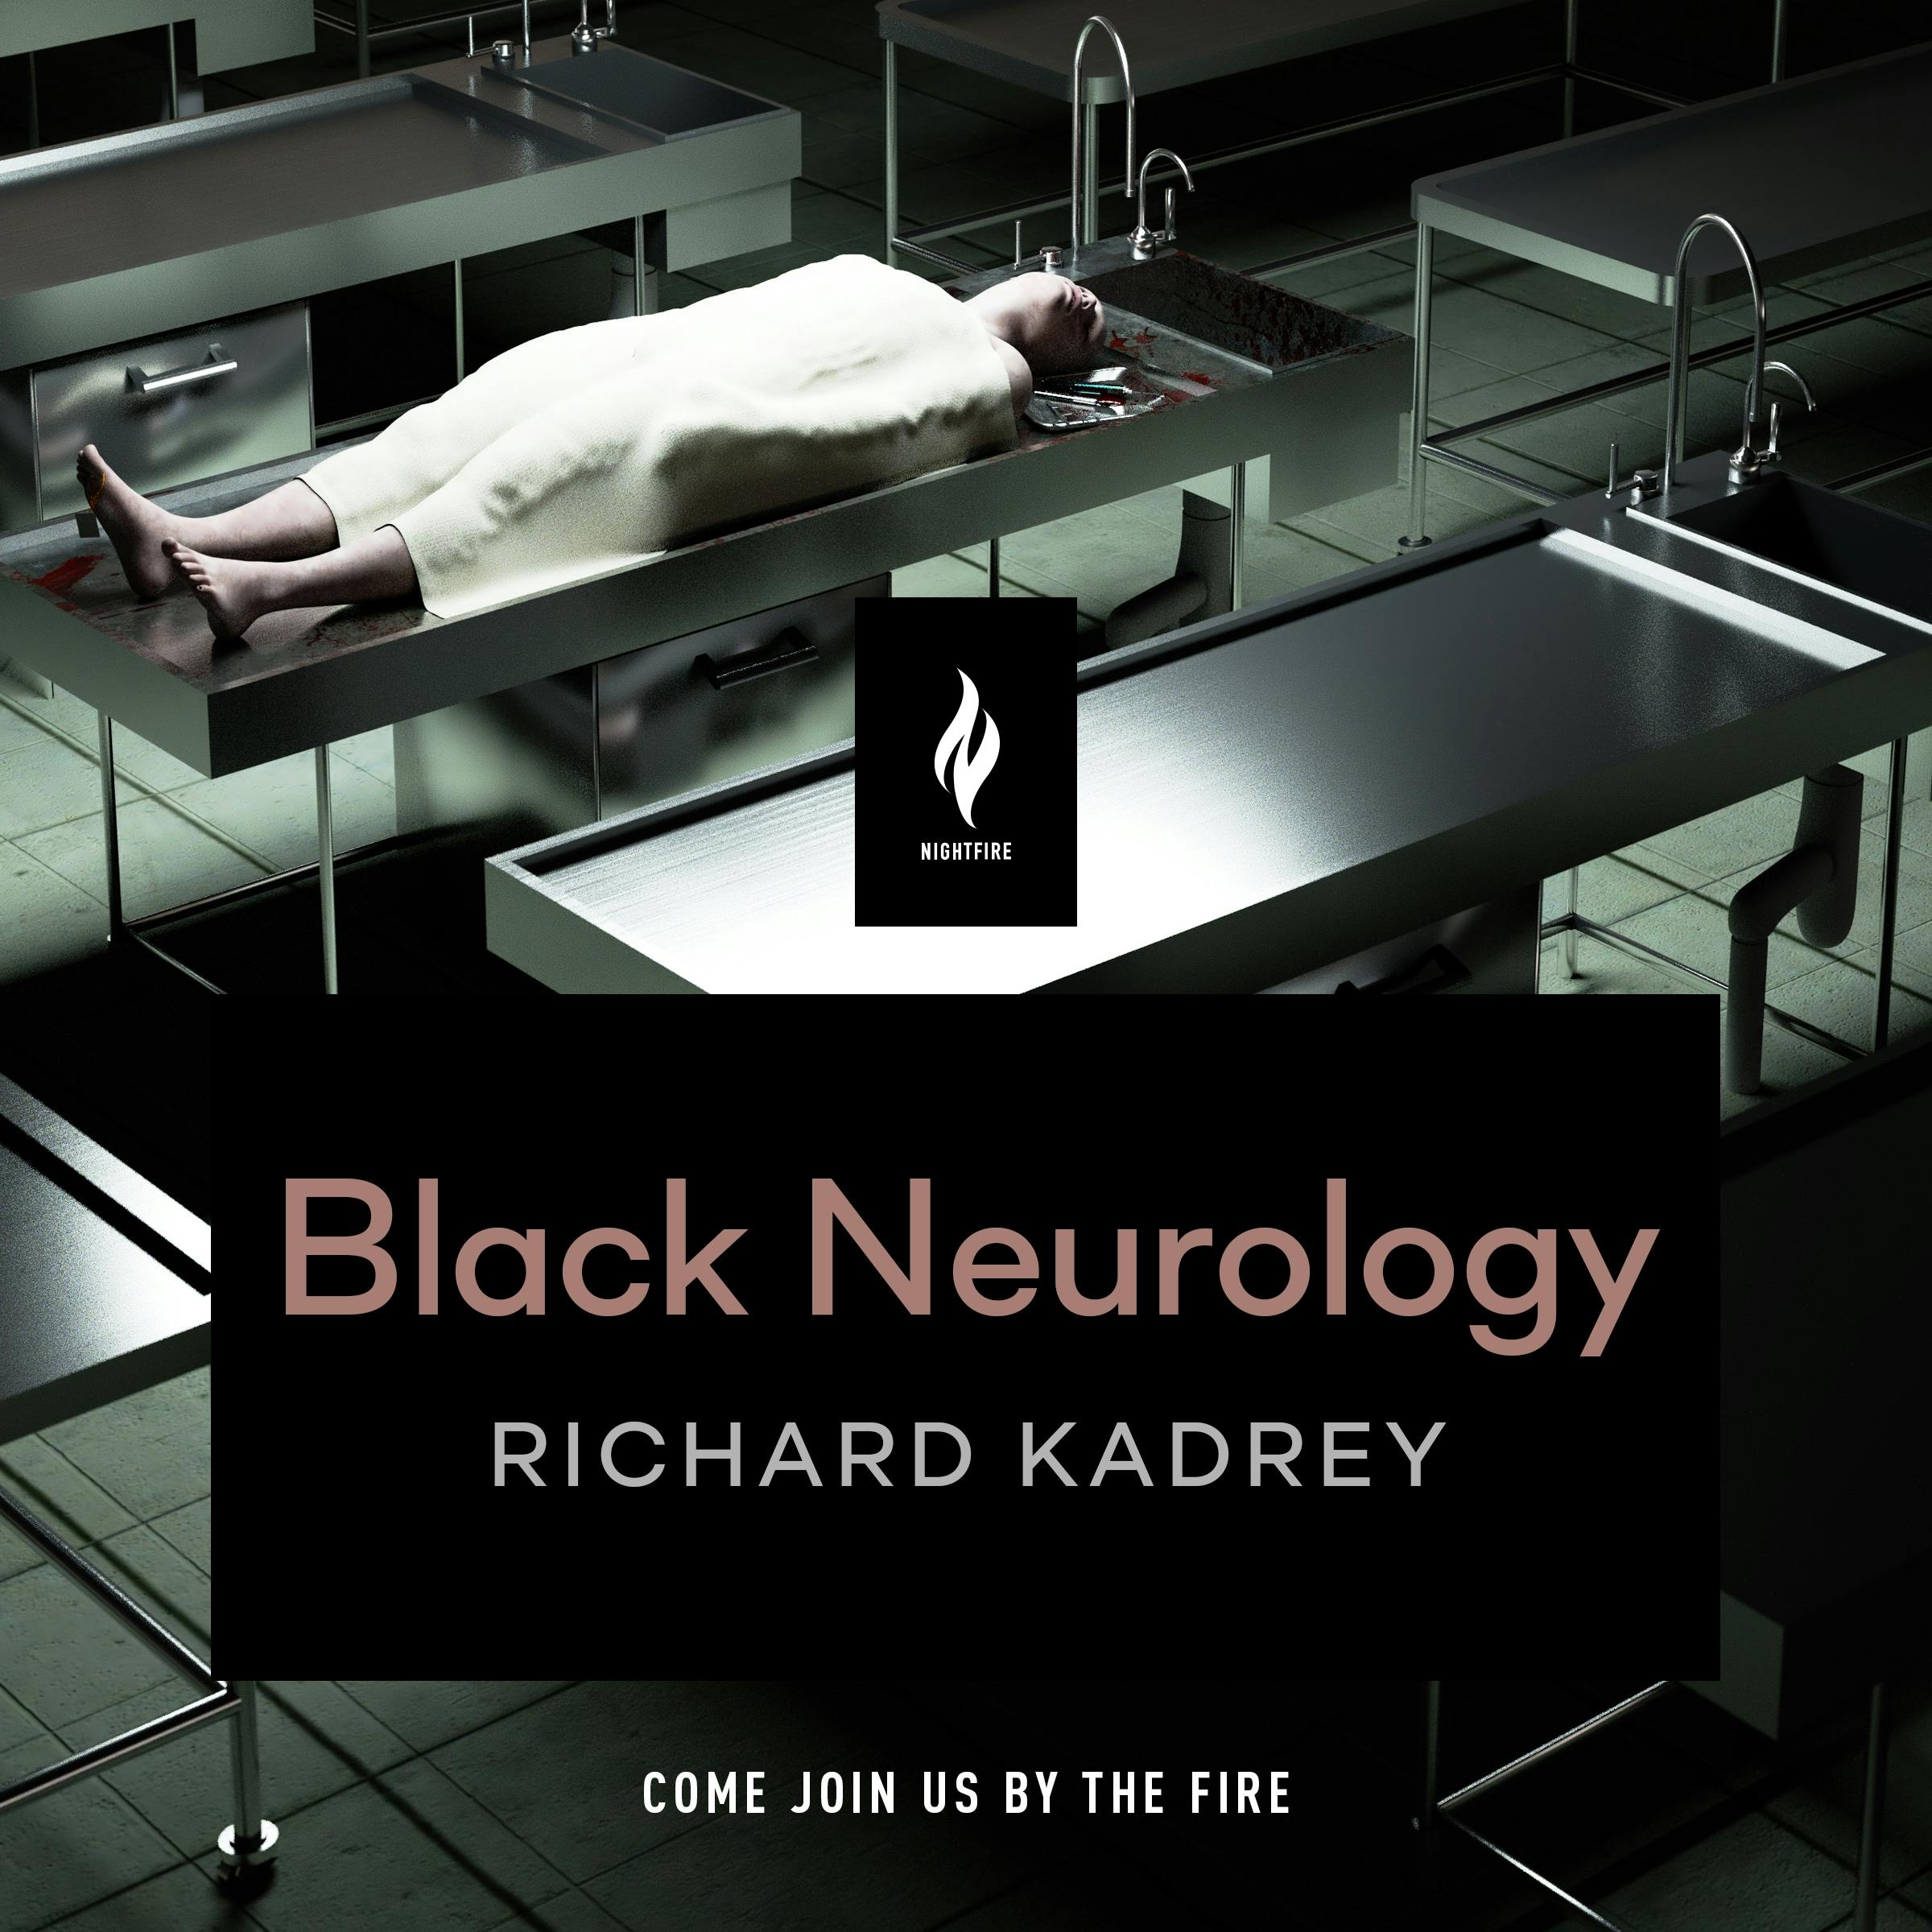 Cover for the book titled as: Black Neurology